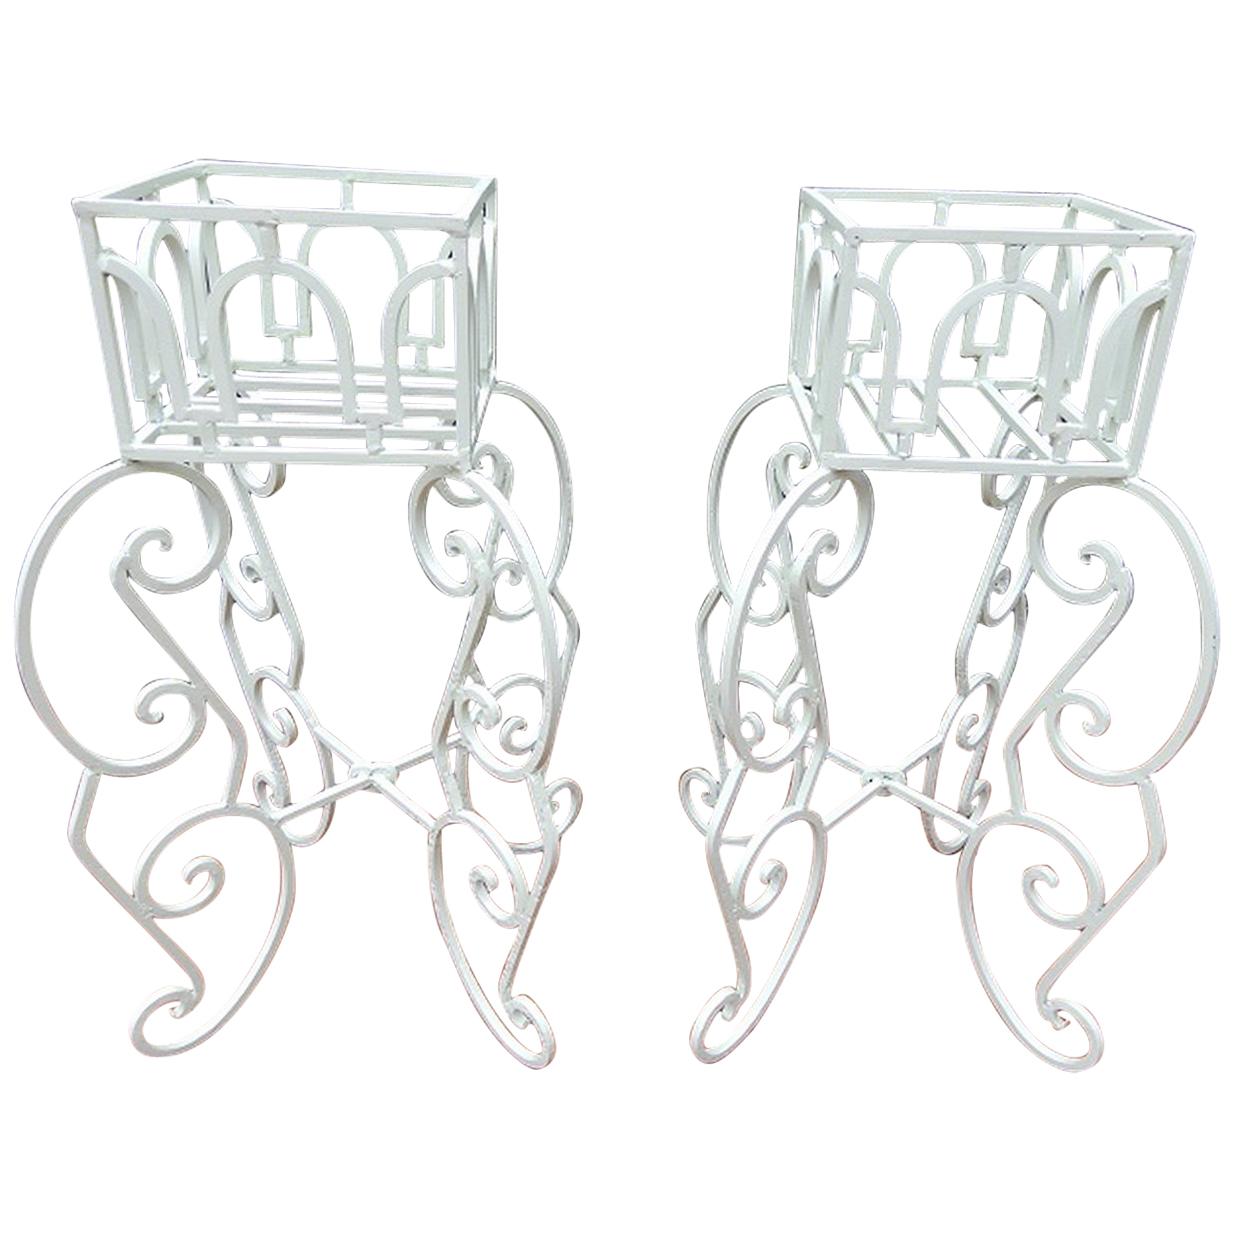 Planters ornate Wrought Iron Pair For Sale